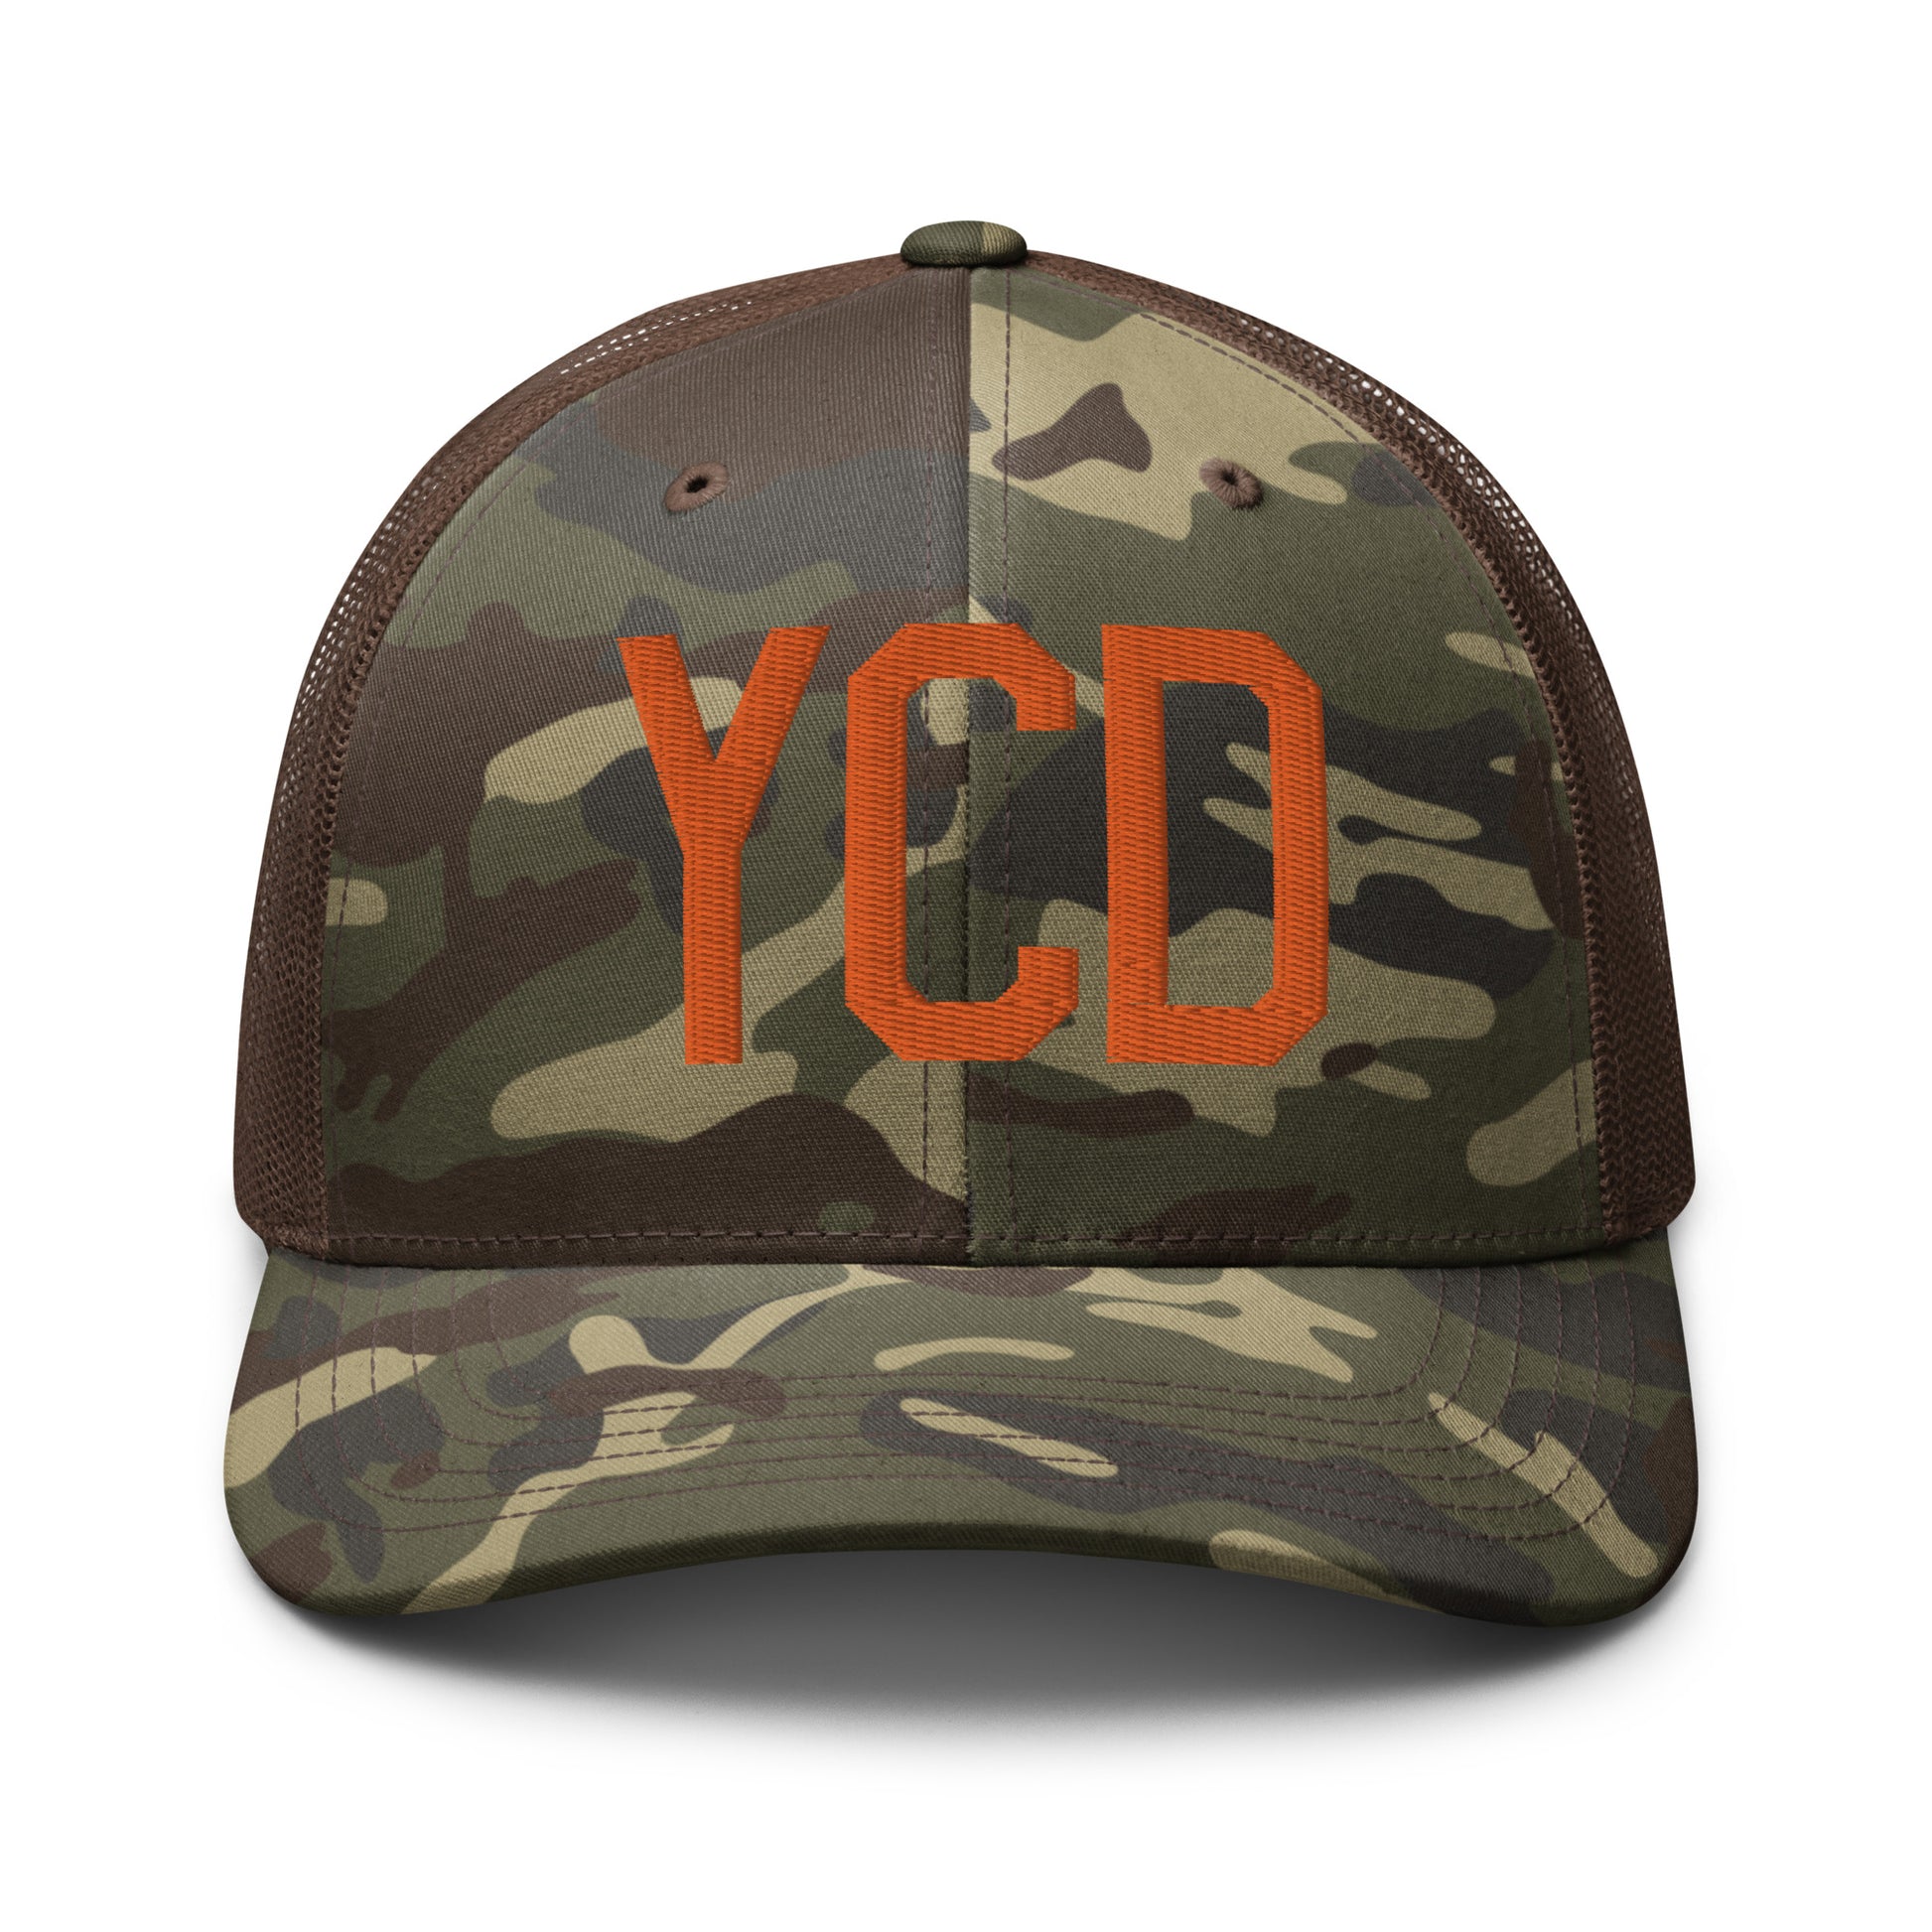 Airport Code Camouflage Trucker Hat - Orange • YCD Nanaimo • YHM Designs - Image 13